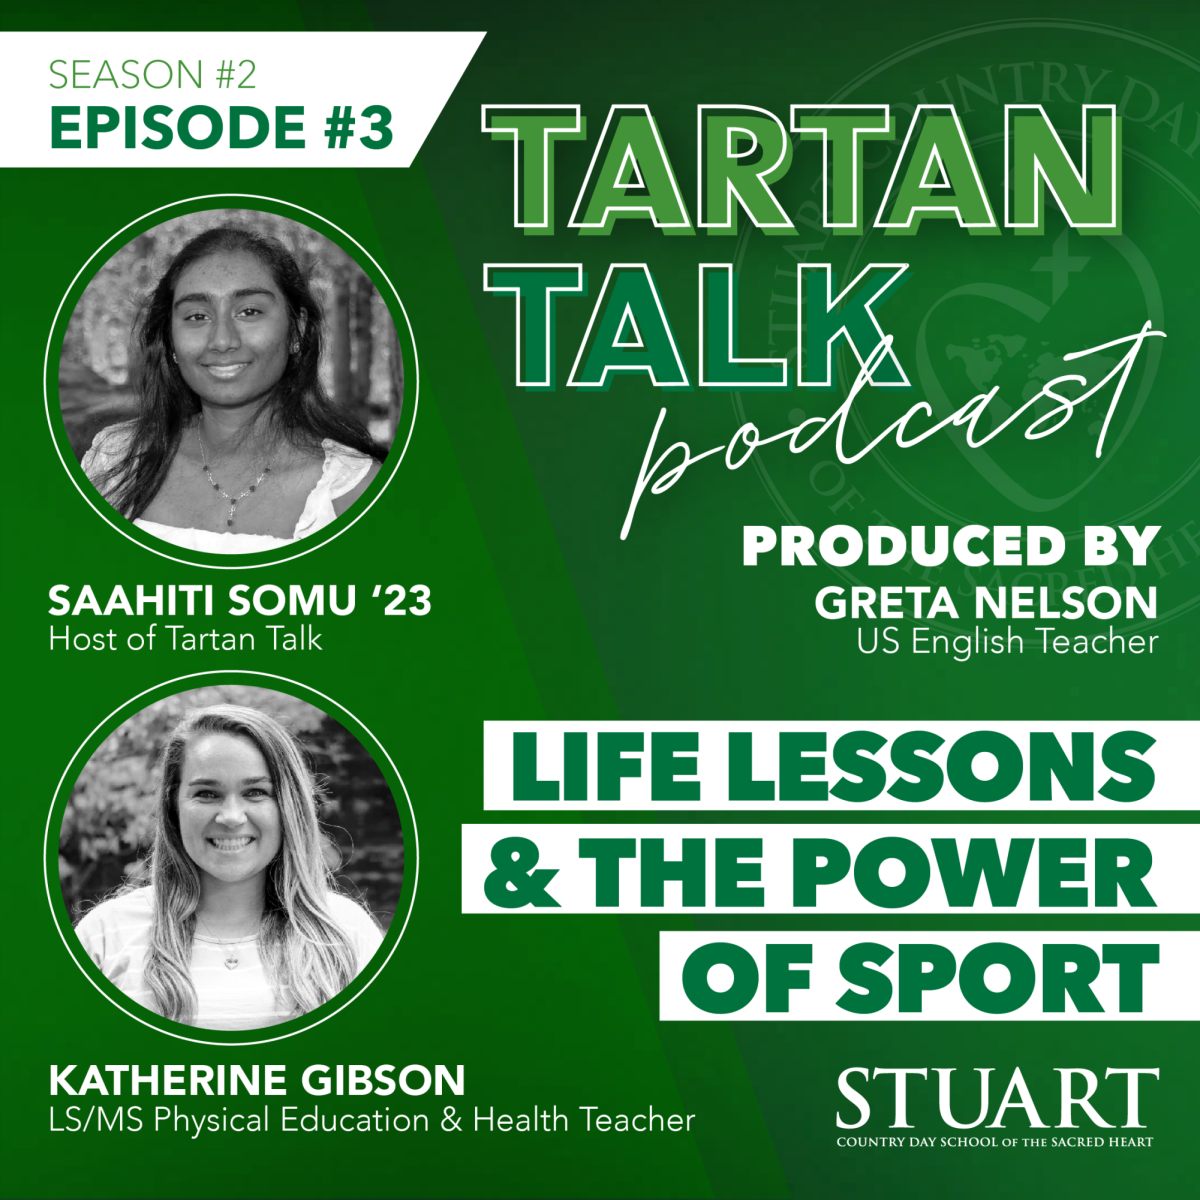 Life Lessons & the Power of Sport